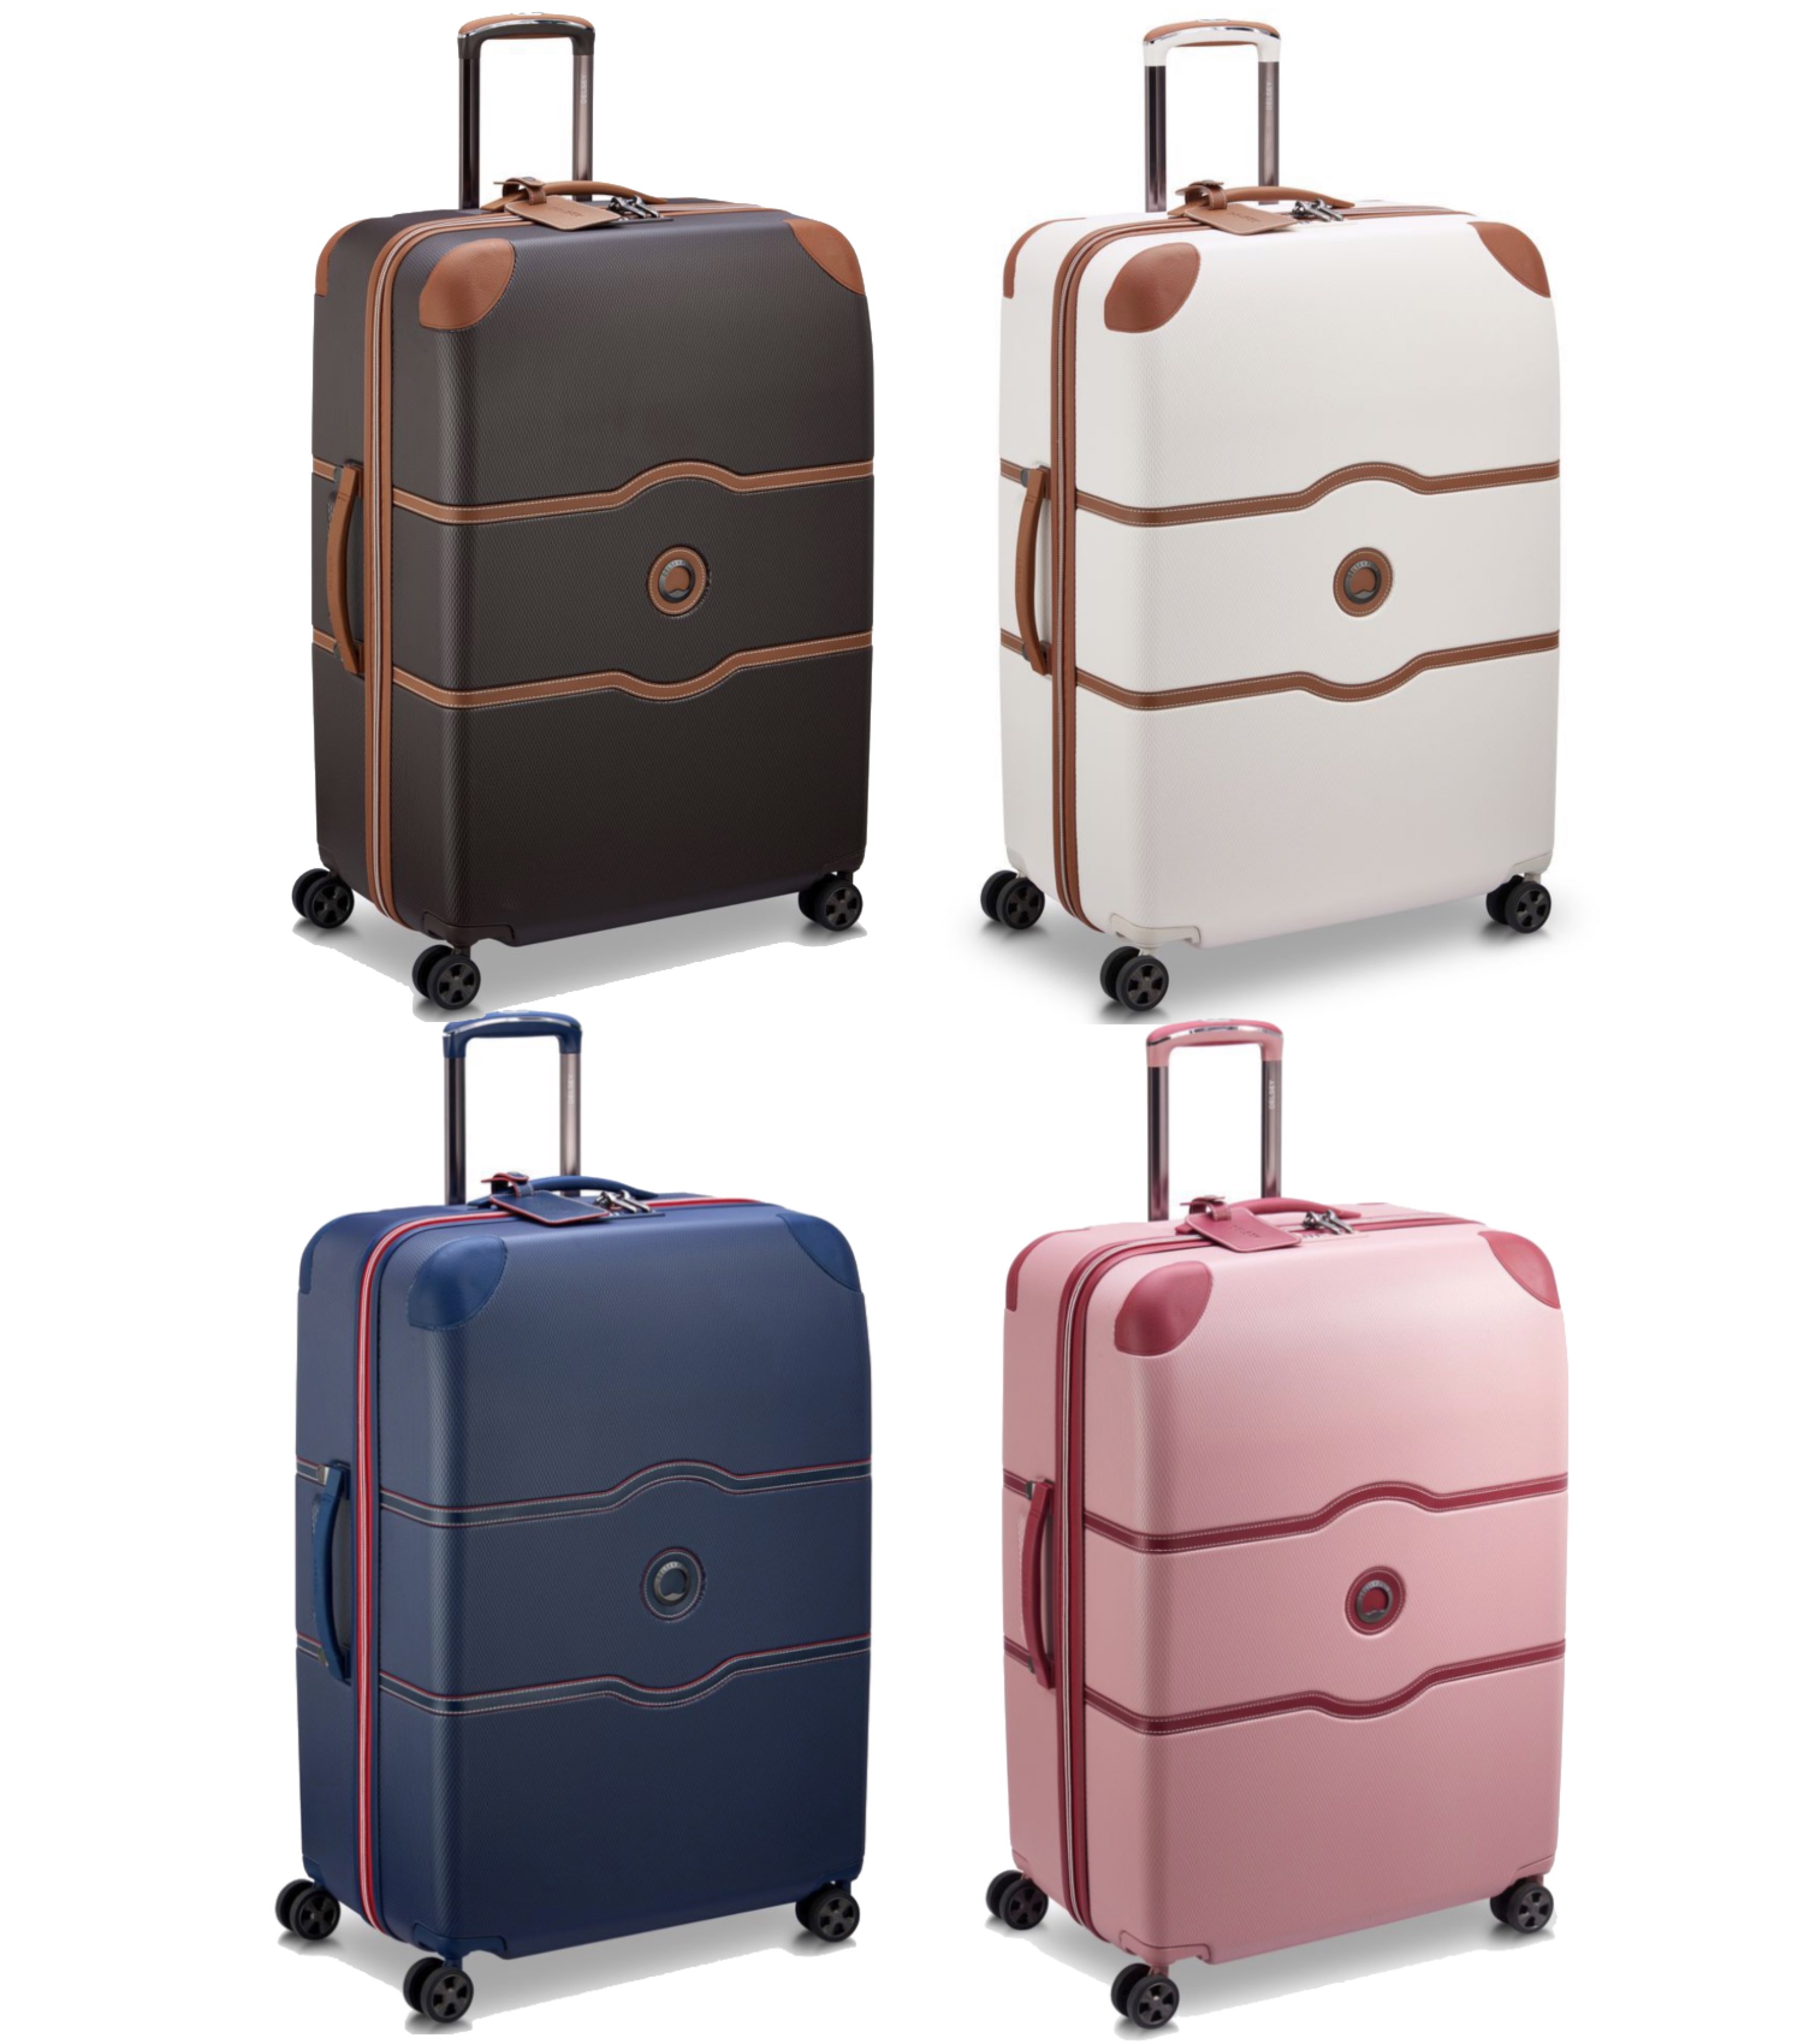 Delsey Chatelet Air 2.0 - 76 cm 4-Wheel Luggage by Delsey Travel Gear